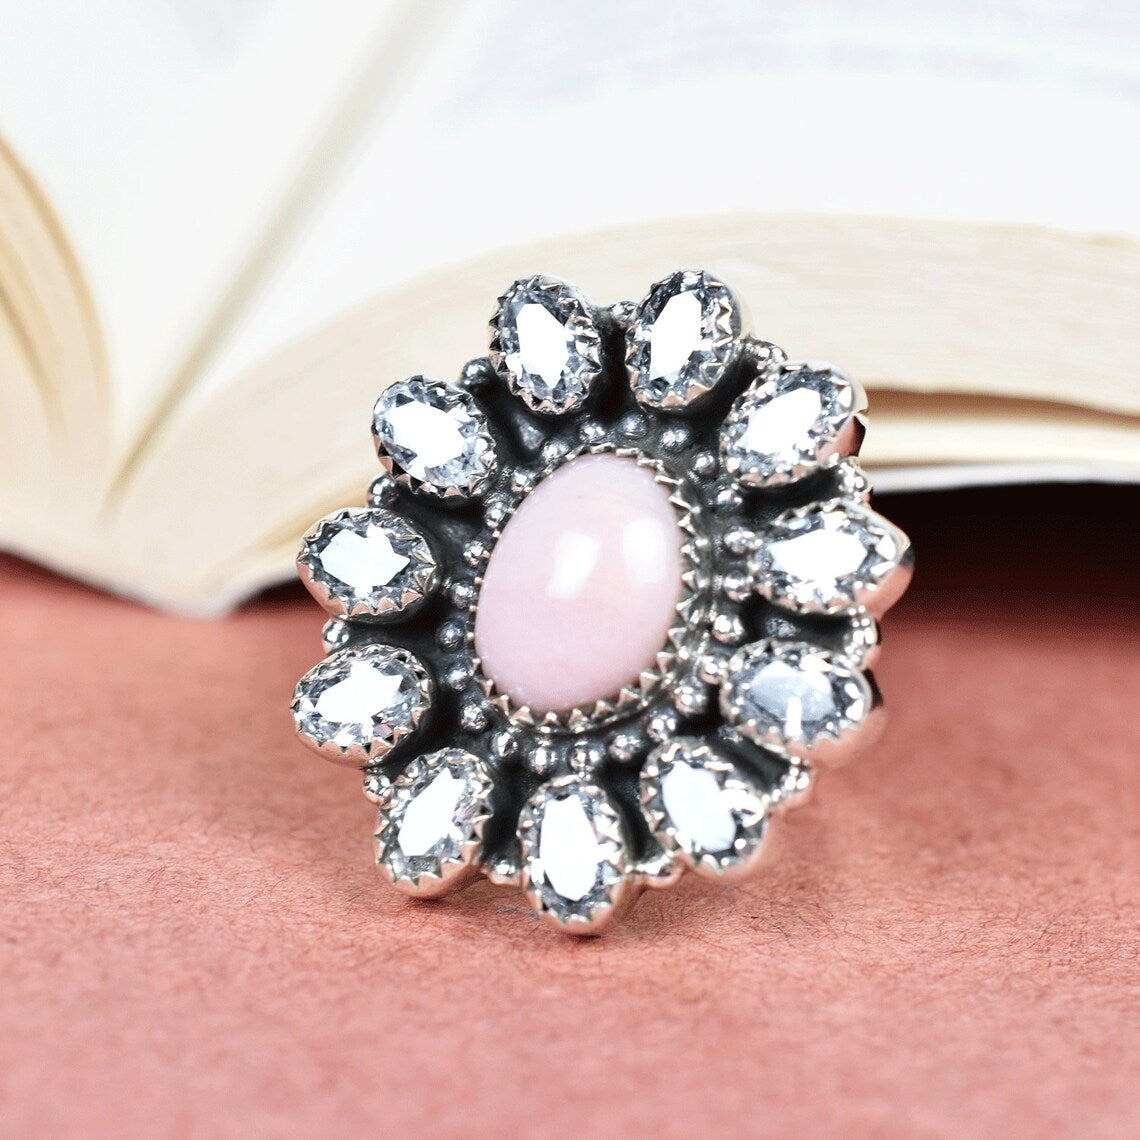 Native American Pink Opal And Cubic Zirconia Cluster Rings - 925 Sterling Silver Boho Rings